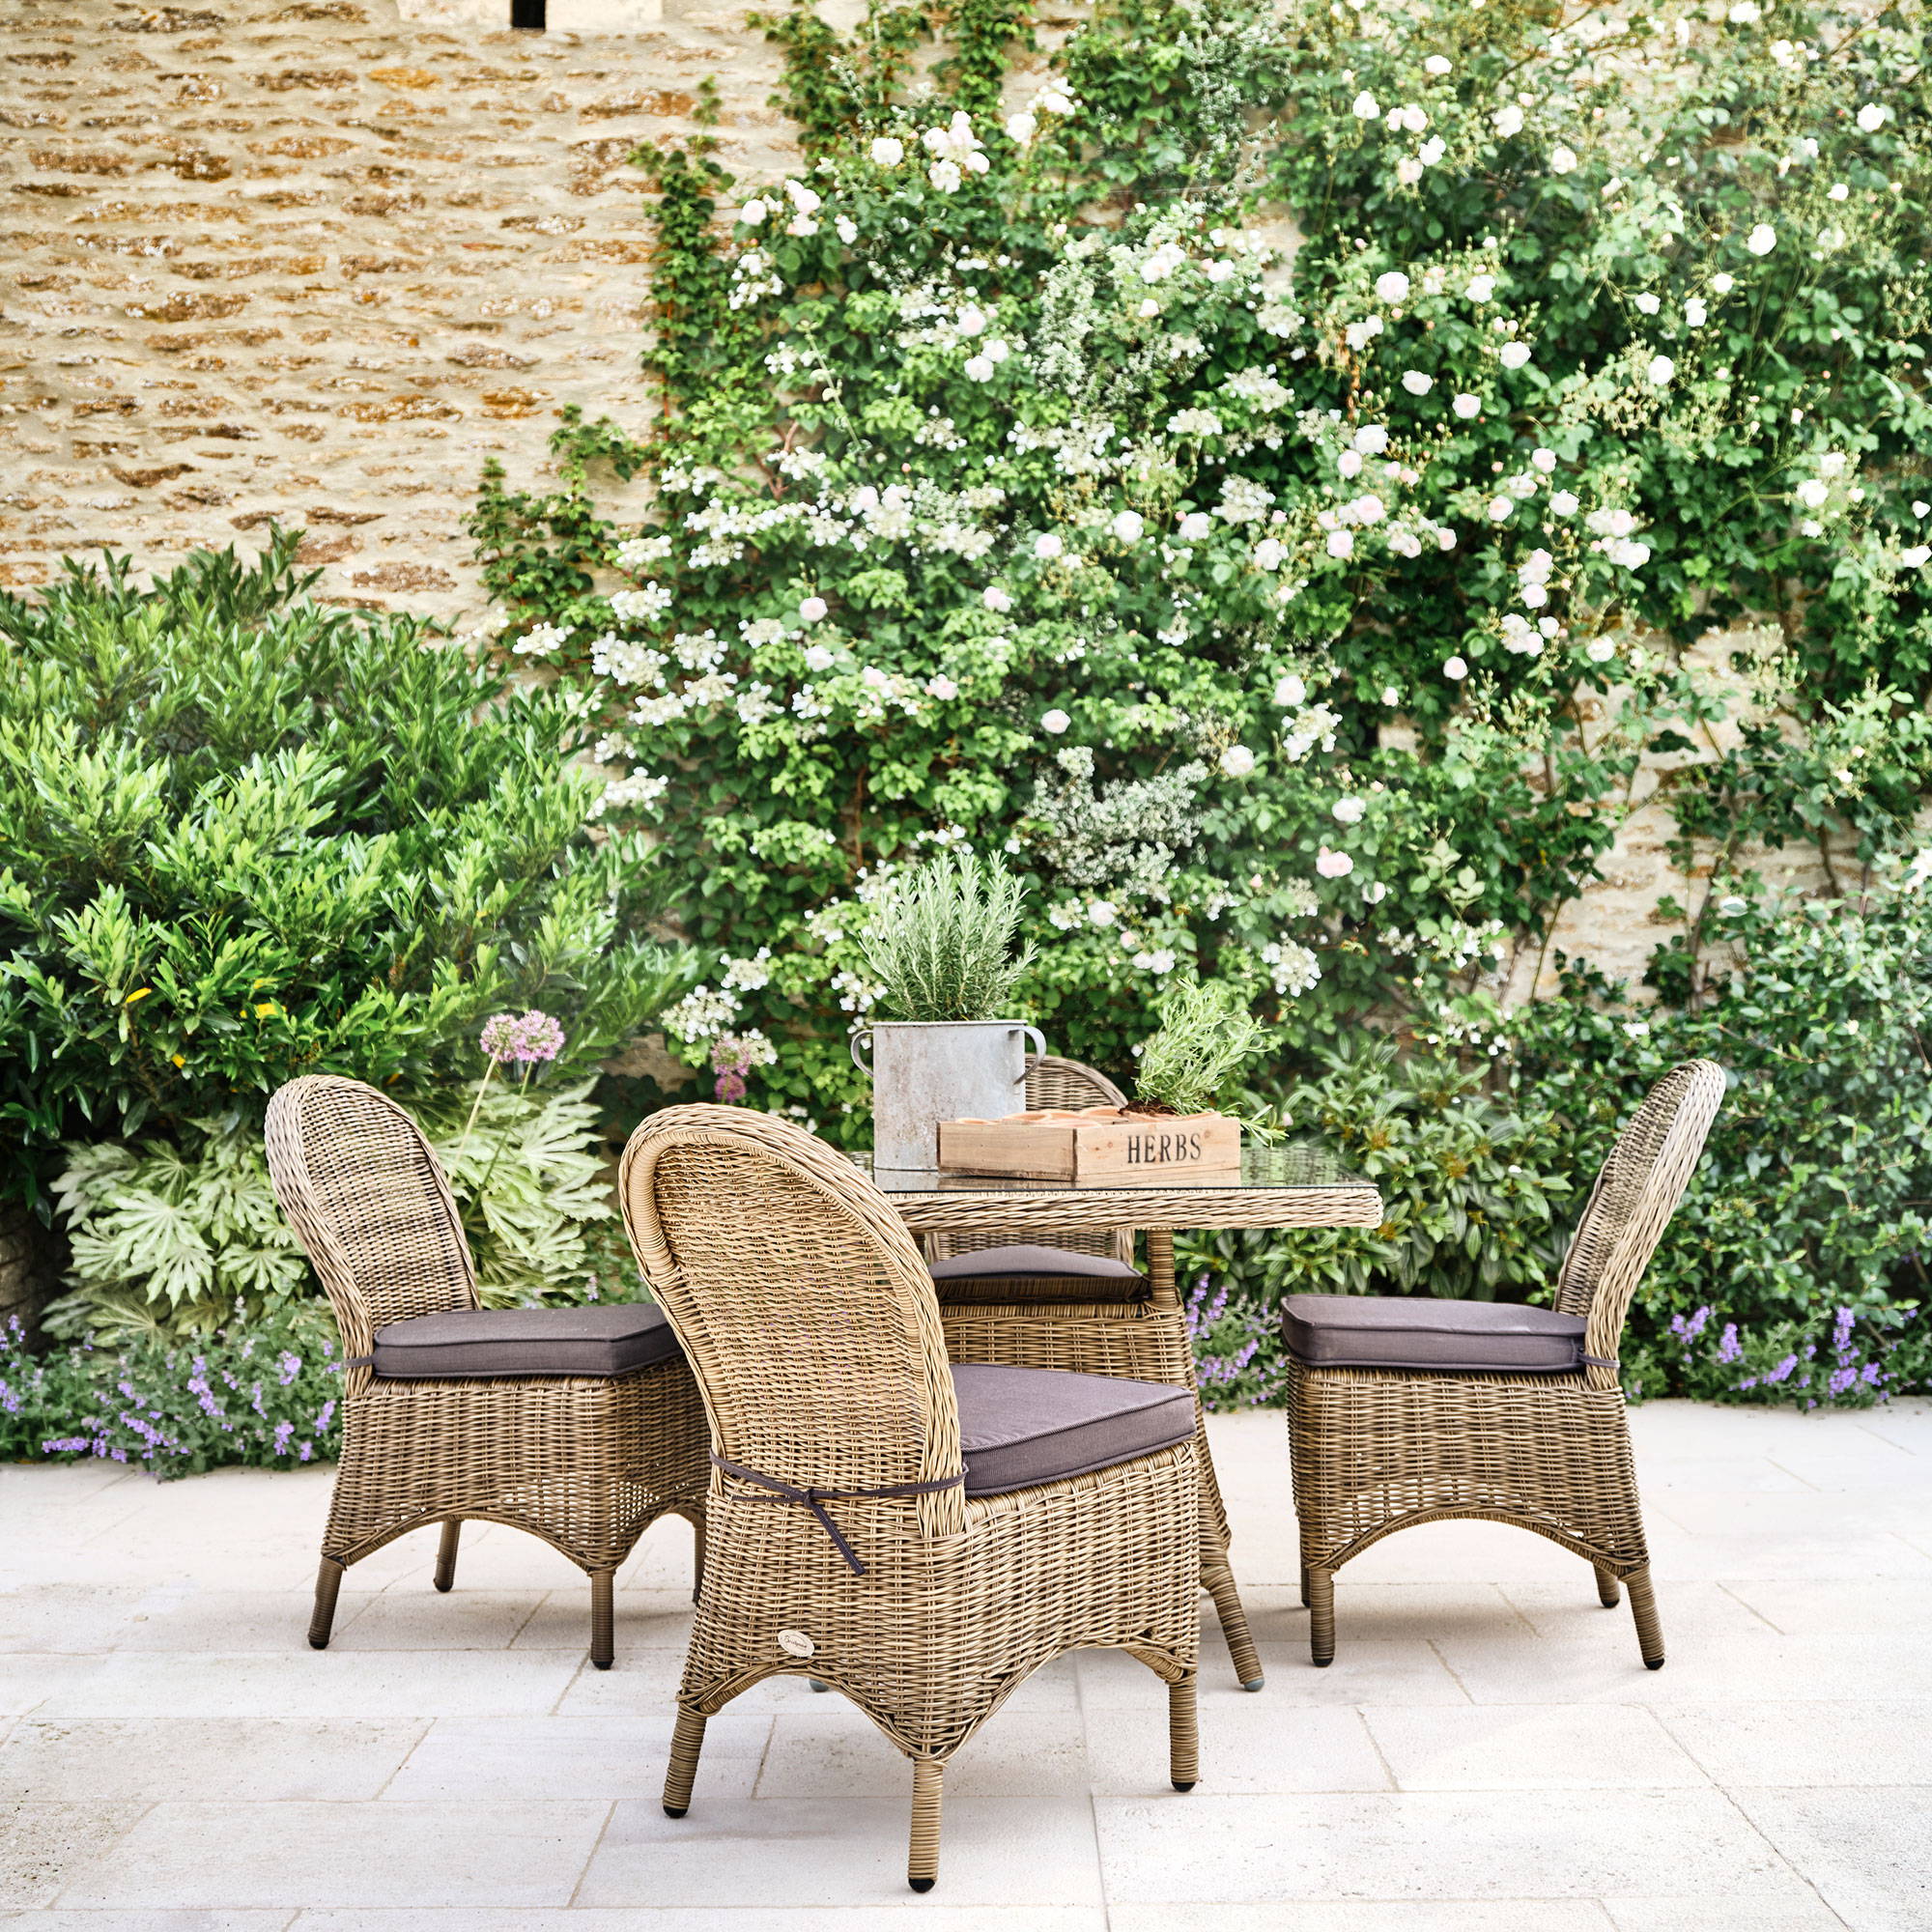 Natural rattan dining set on a patio in front of a wall of ivy and lavendar.